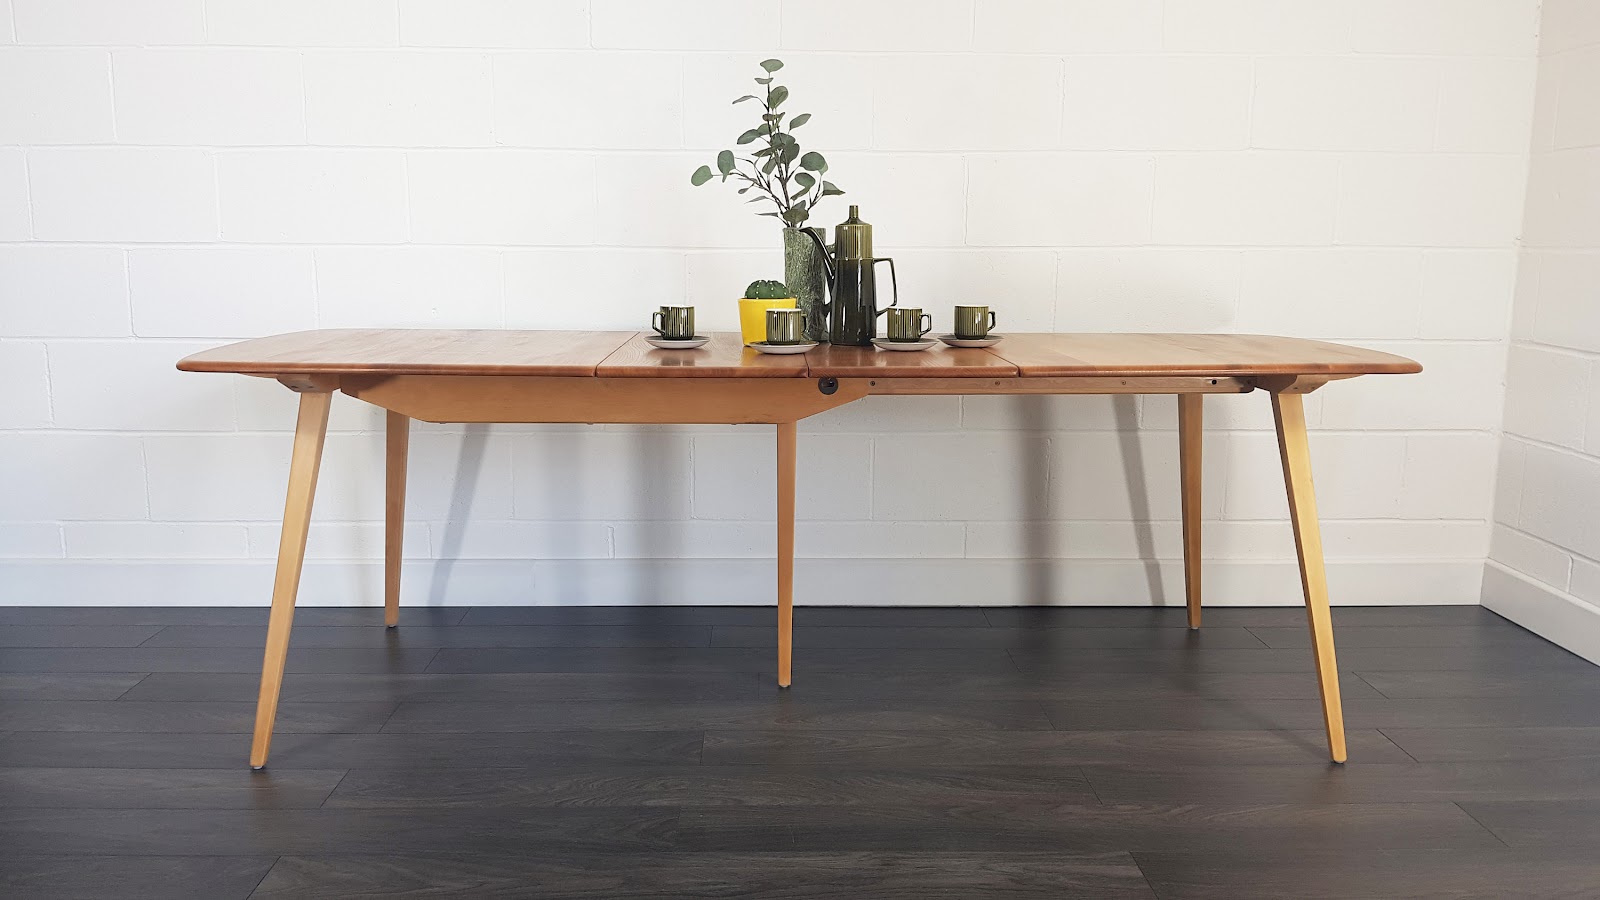 Gather friends and family around these stunning tables - Vinterior